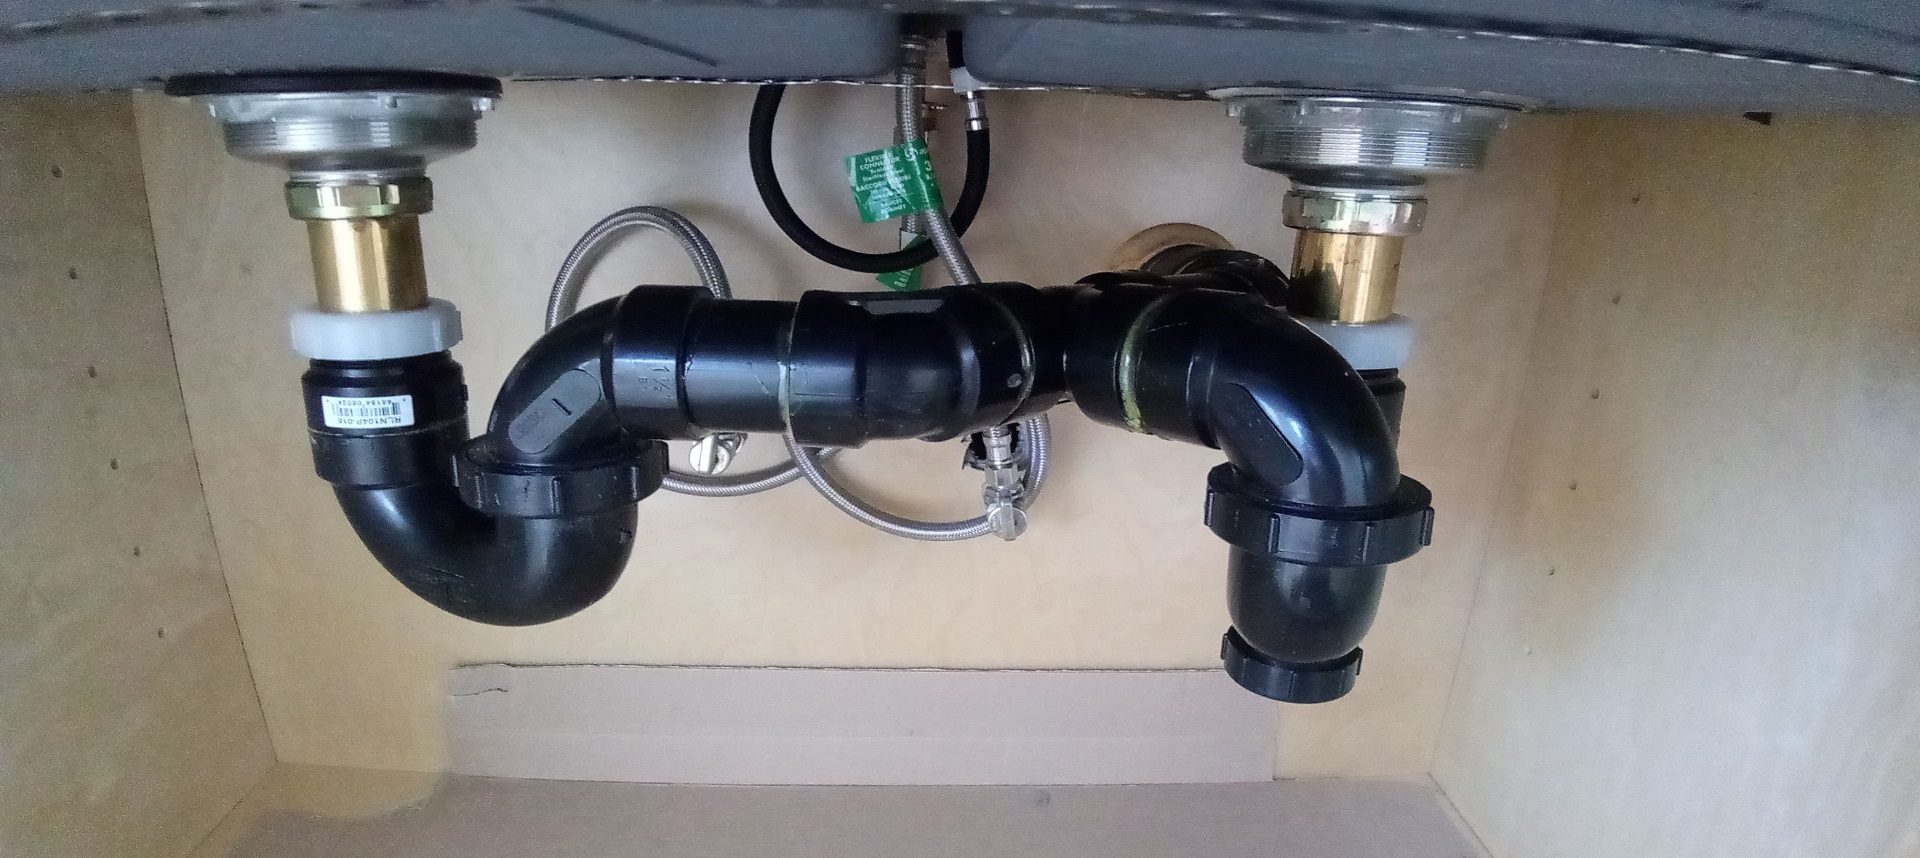 kitchen sink plumbing in a stud wall